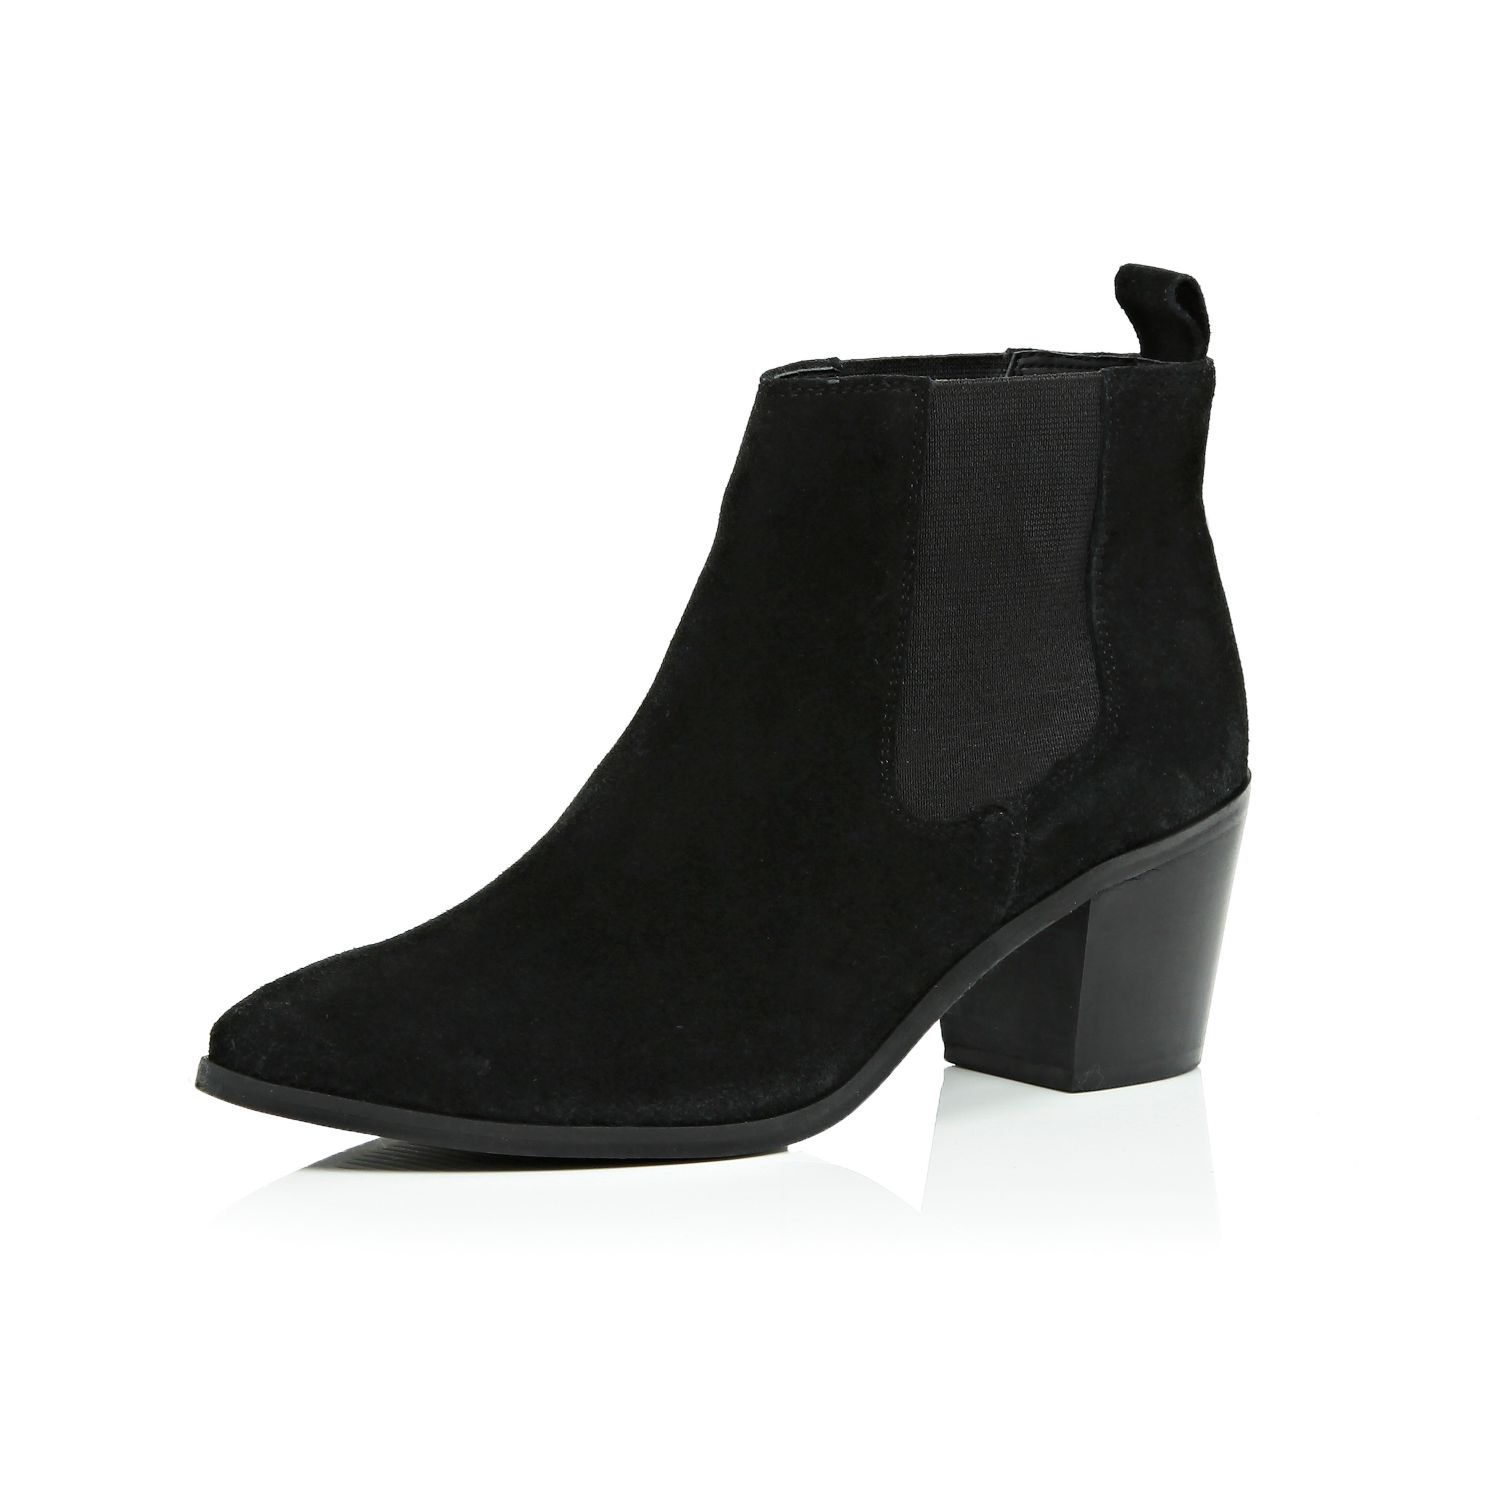 Lyst - River Island Black Suede Mid Heel Ankle Boots in Black